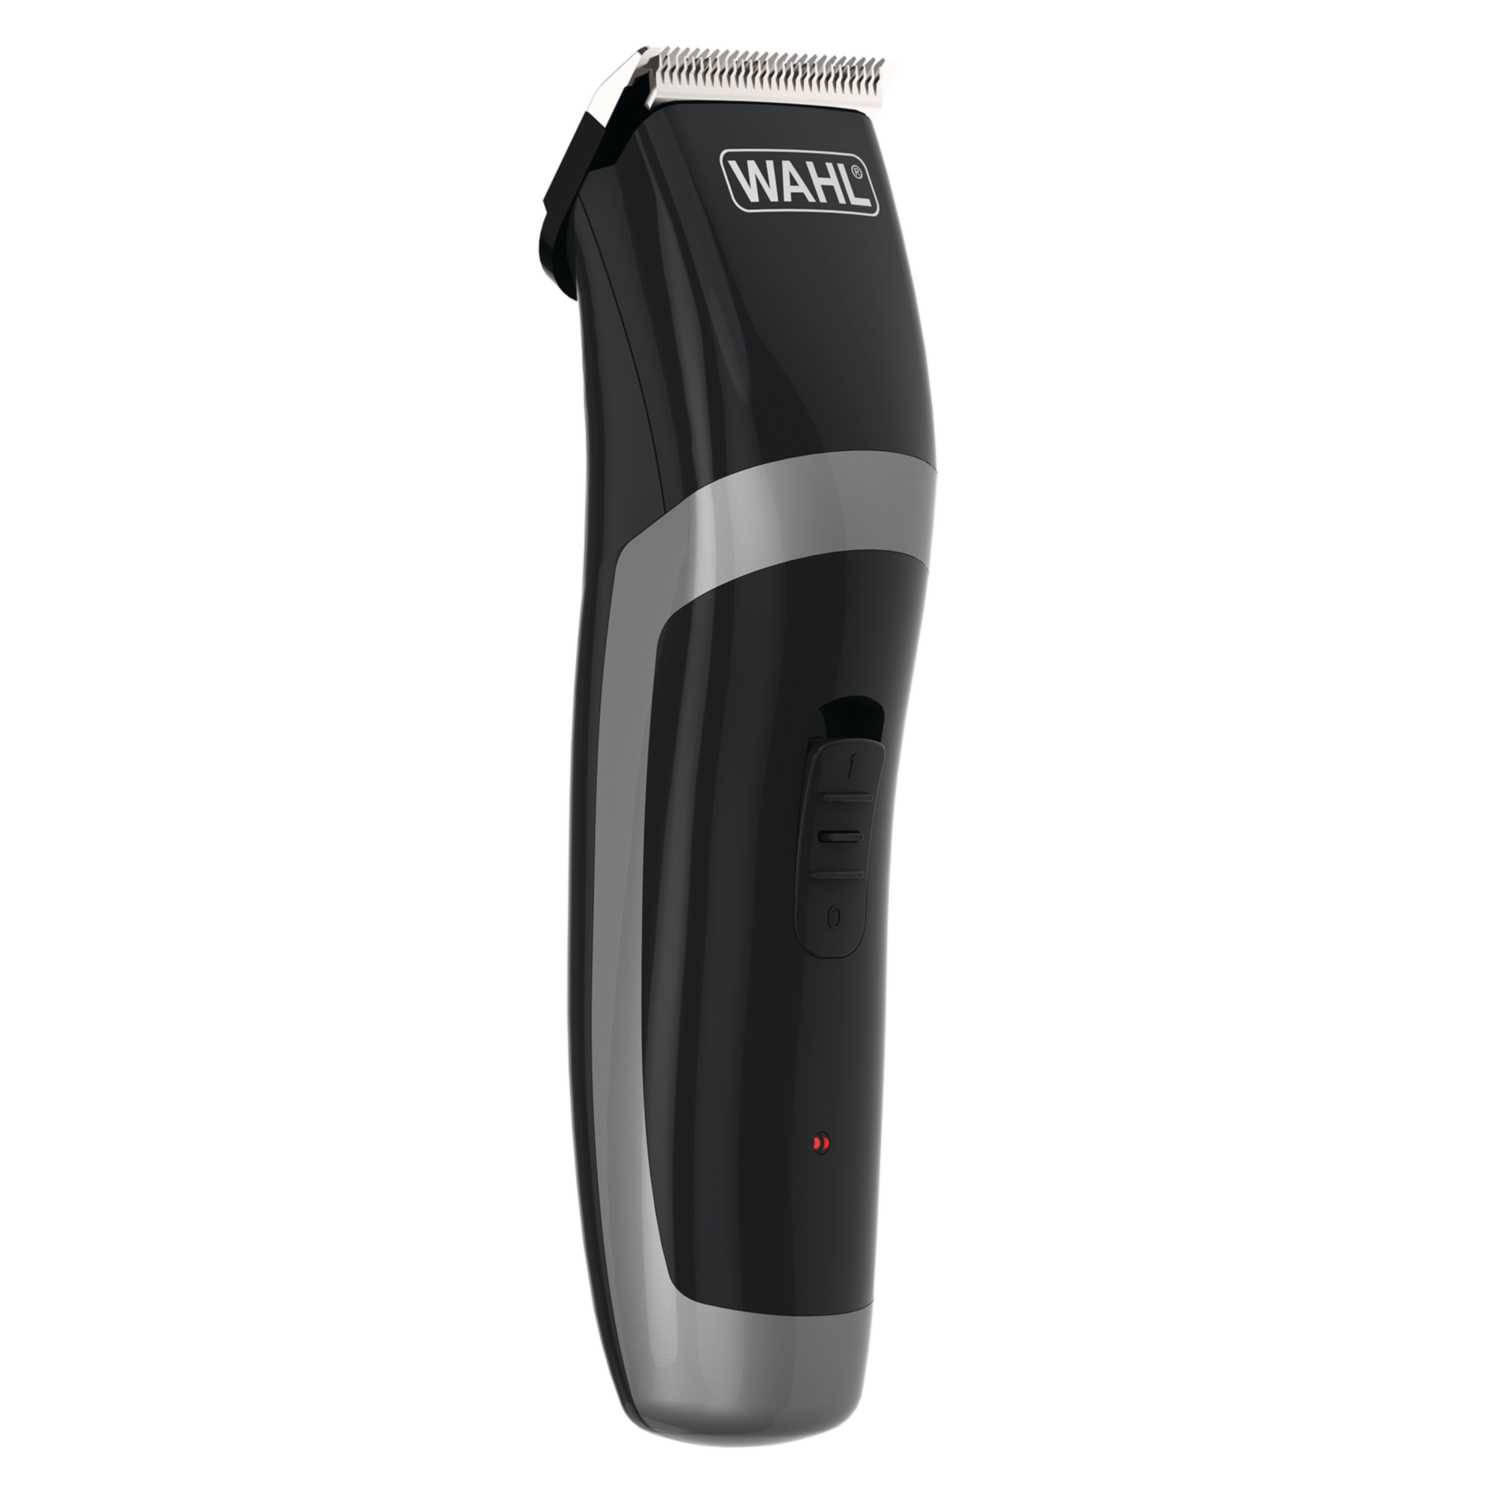 Wahl Corded/Cordless Clippers